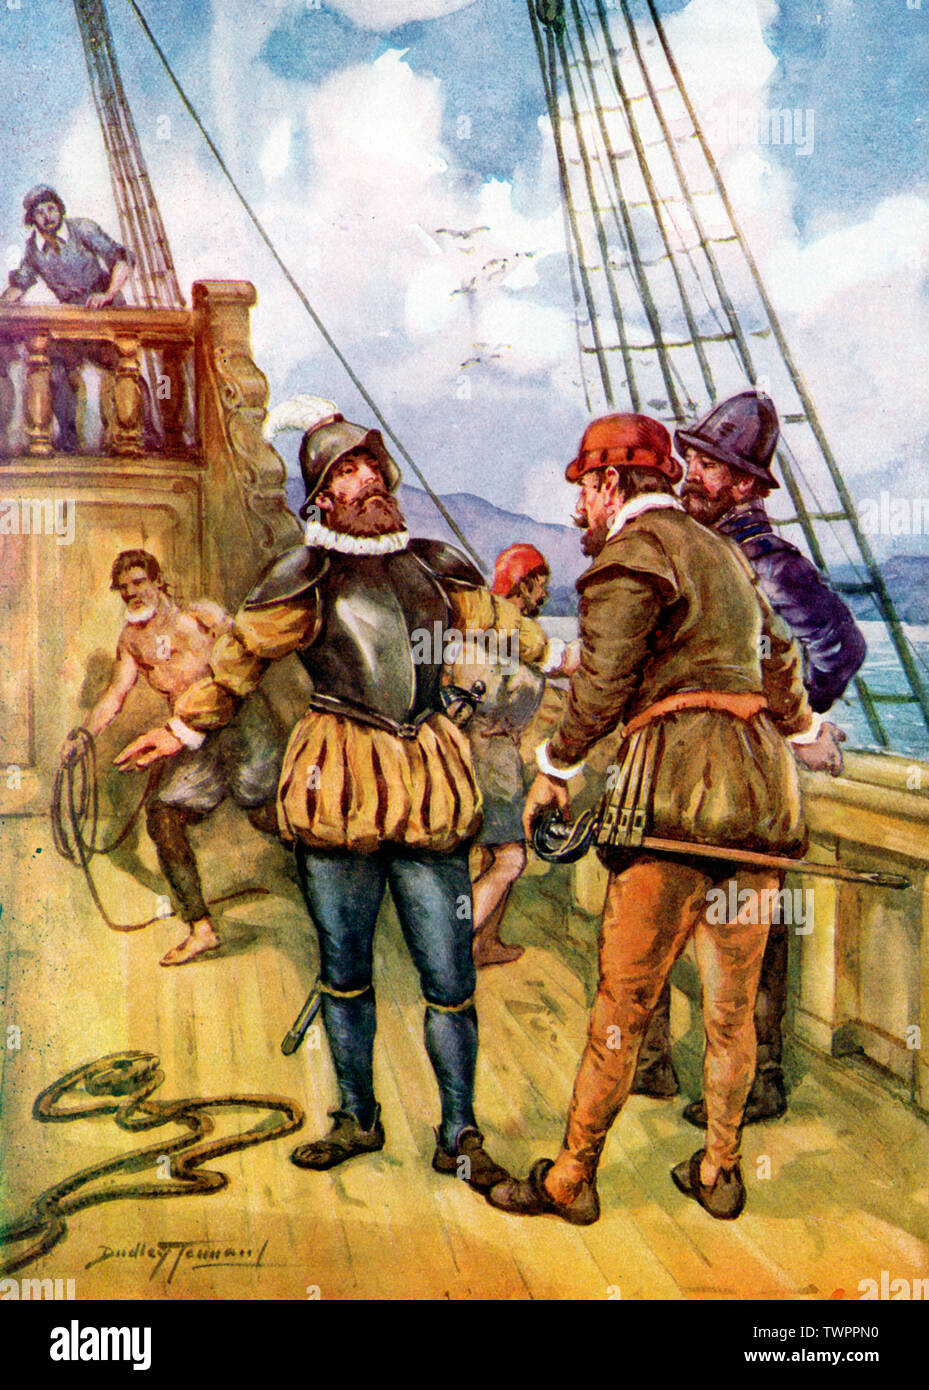 Fernando de Magellan (Ferdinand Magellan) leaving Spain, 20th September 1519, on the expedition that would become the first ever circumnavigation of the globe. By Dudley Tennant (1867-1952). The goal of the expedition was to find a western route to the Moluccas (Spice Islands) and trade for spices. Magellan sailed across the Atlantic, and discovered the strait that now bears his name, allowing him to pass through the southern tip of South America into the Pacific Ocean (which he named). The fleet performed the first ever crossing of the Pacific and eventually reached the Moluccas. A much-deple Stock Photo